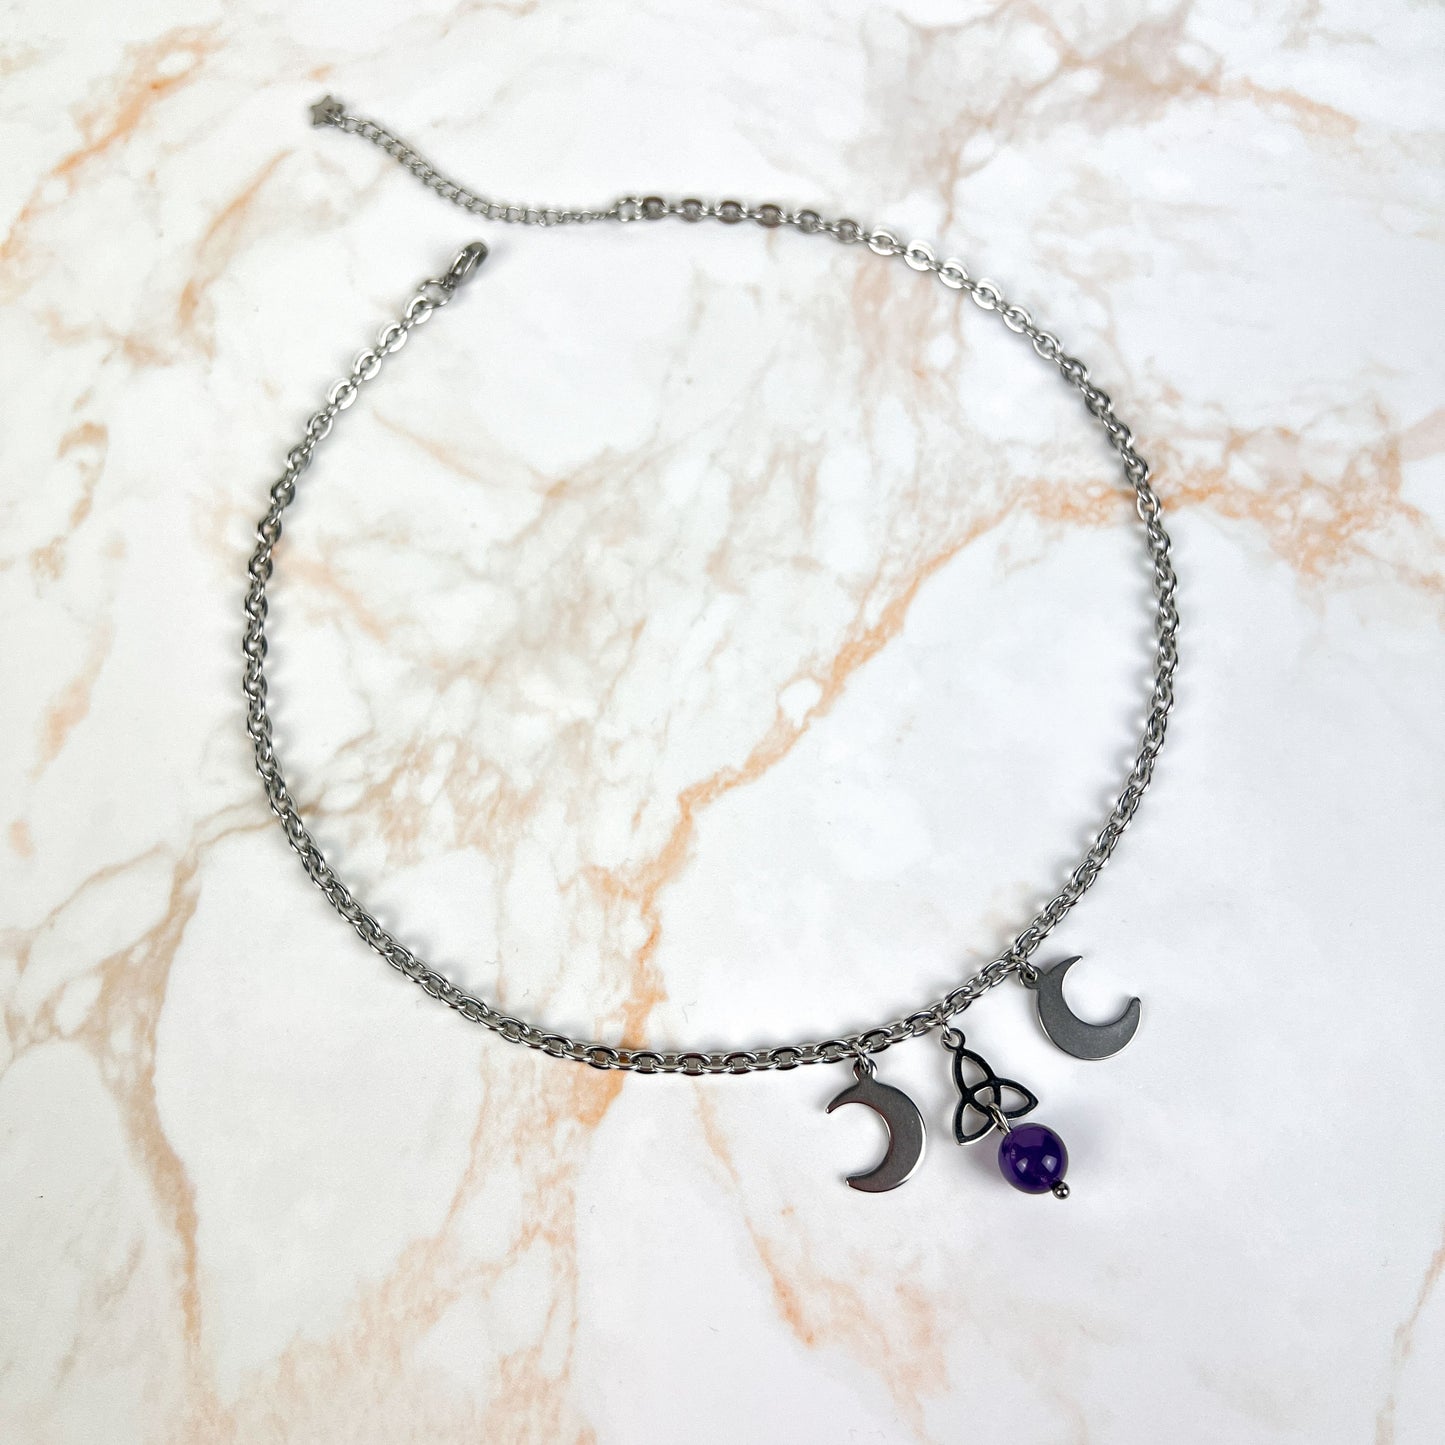 Triple moon Triquetra necklace made of stainless steel and gemstone Baguette Magick